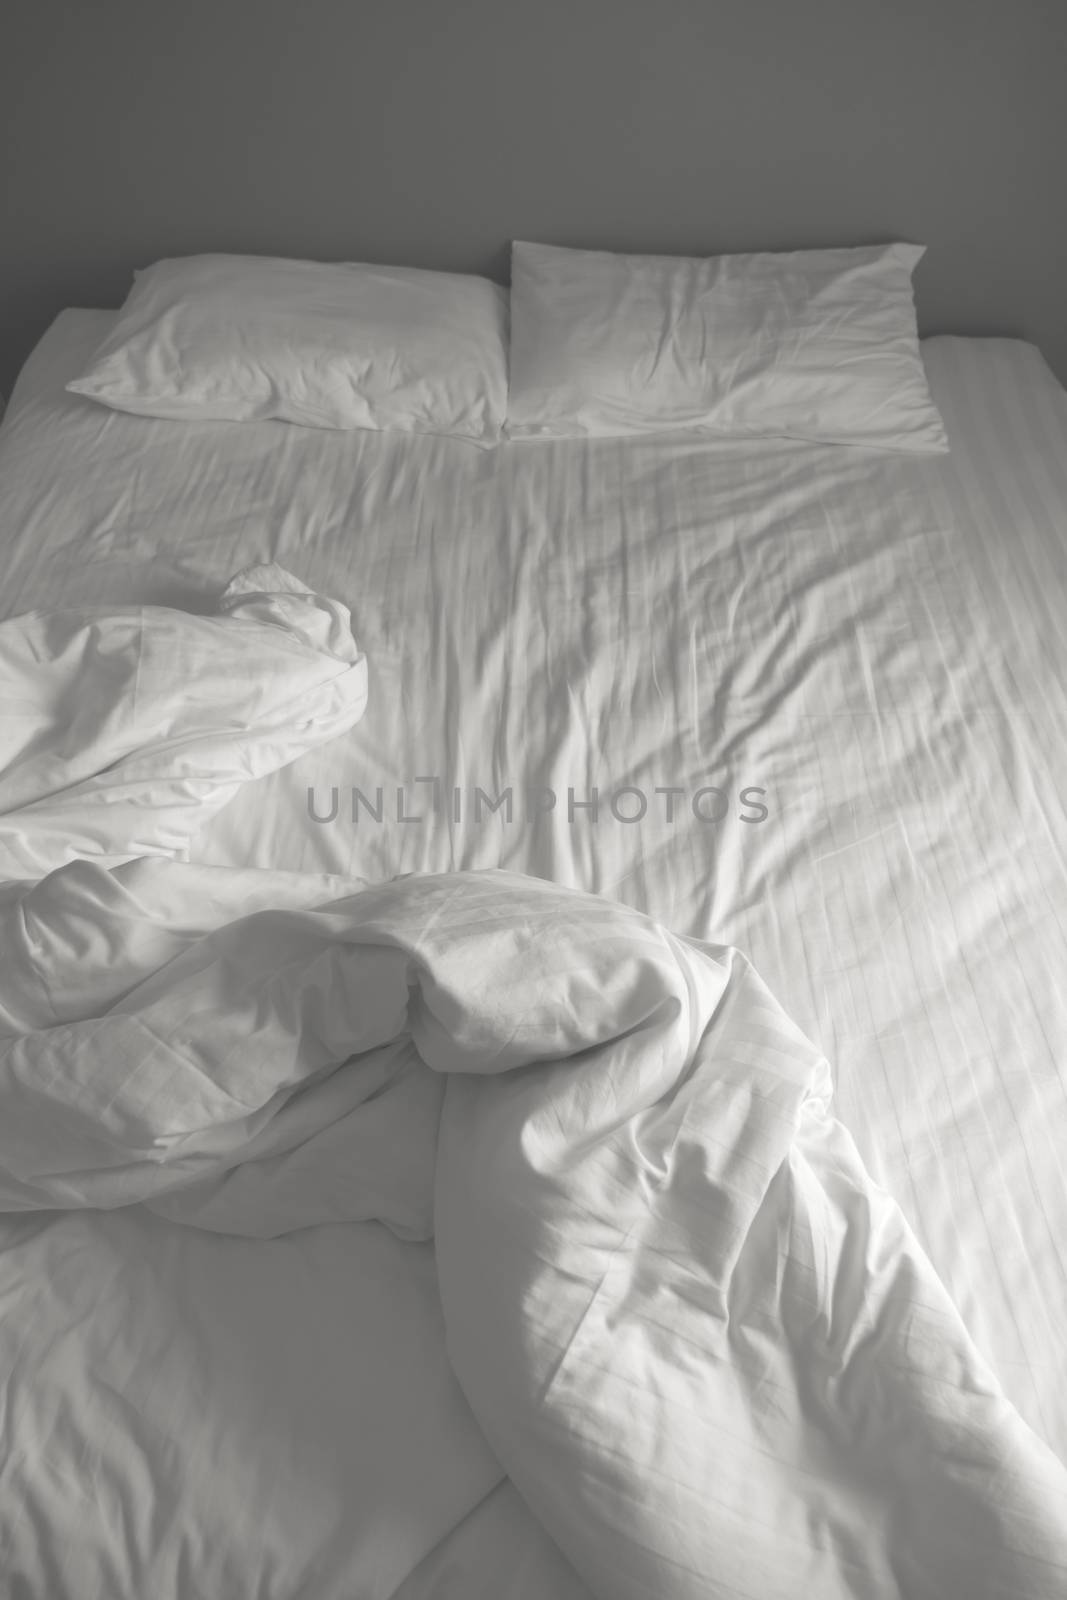 Messy white bedding sheets and pillows. black and white tone by ronnarong